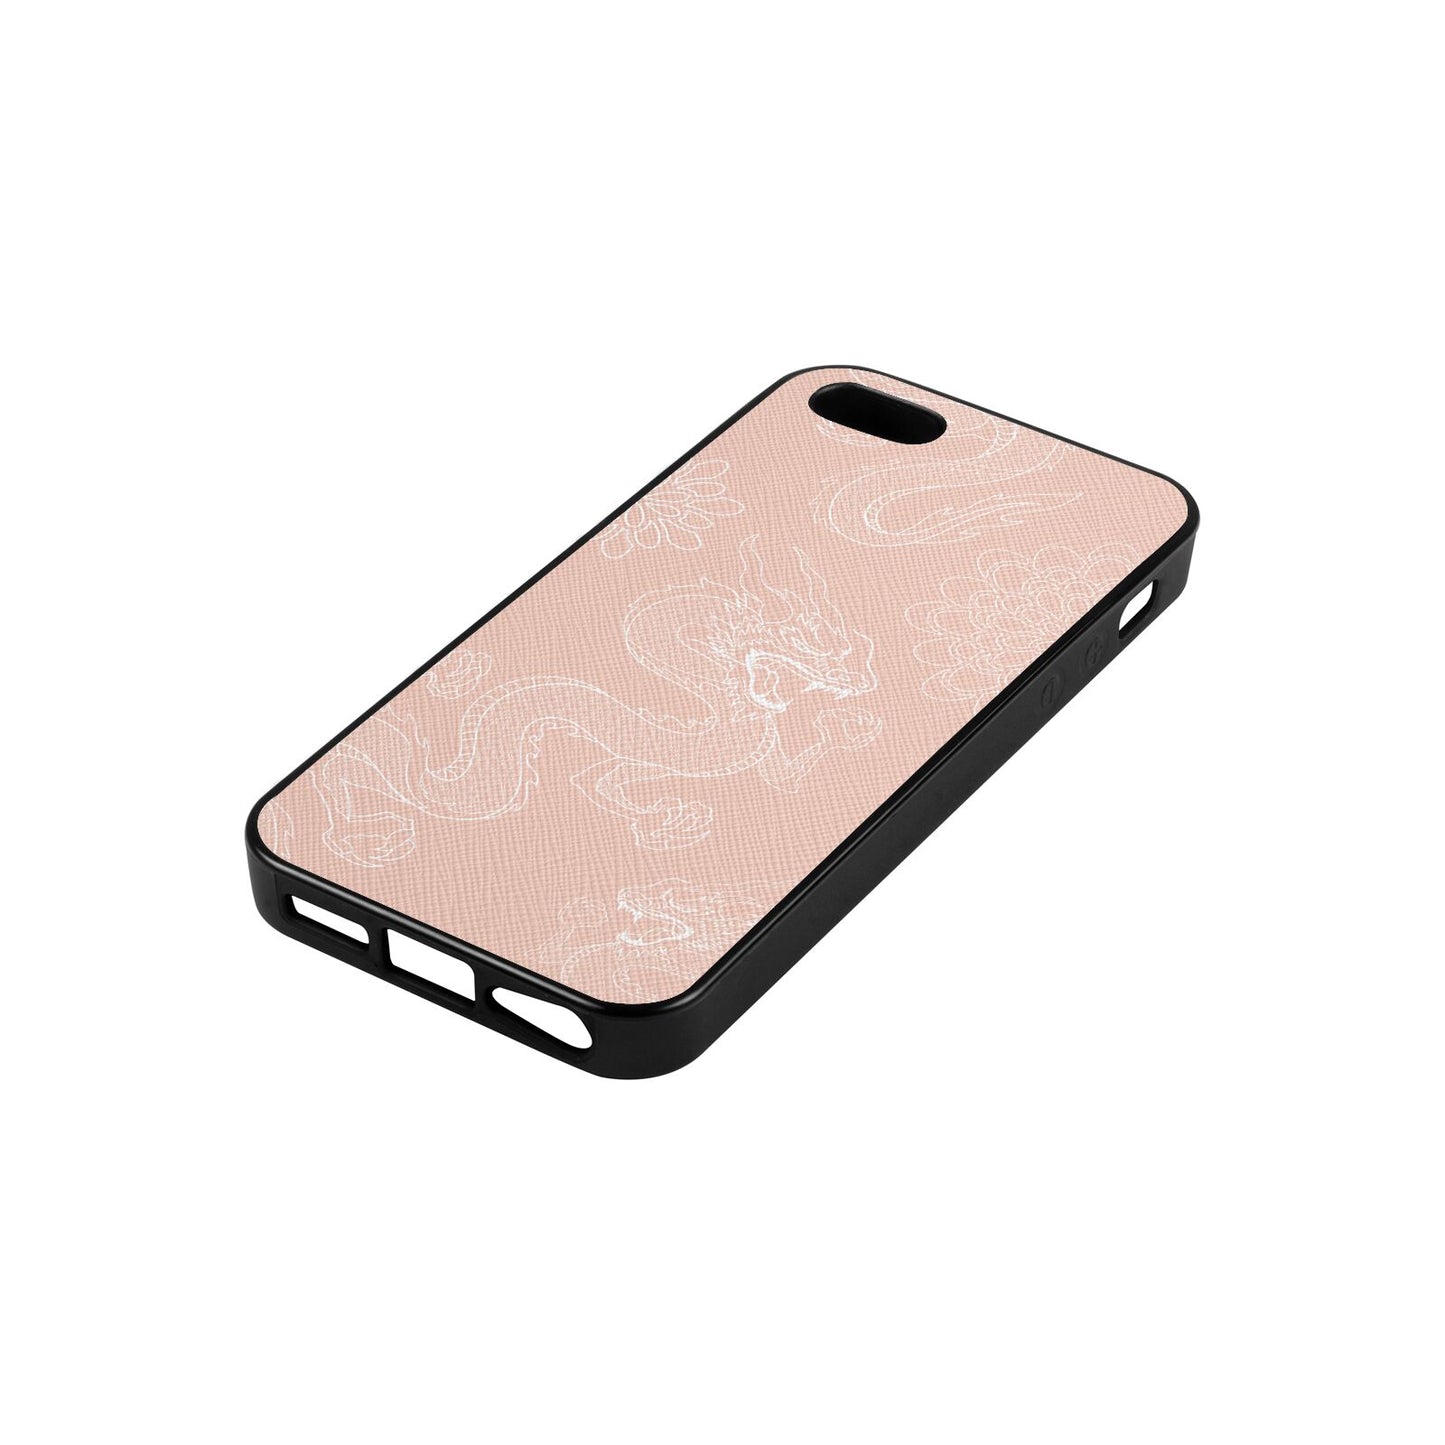 Dragons Nude Saffiano Leather iPhone 5 Case Side Angle